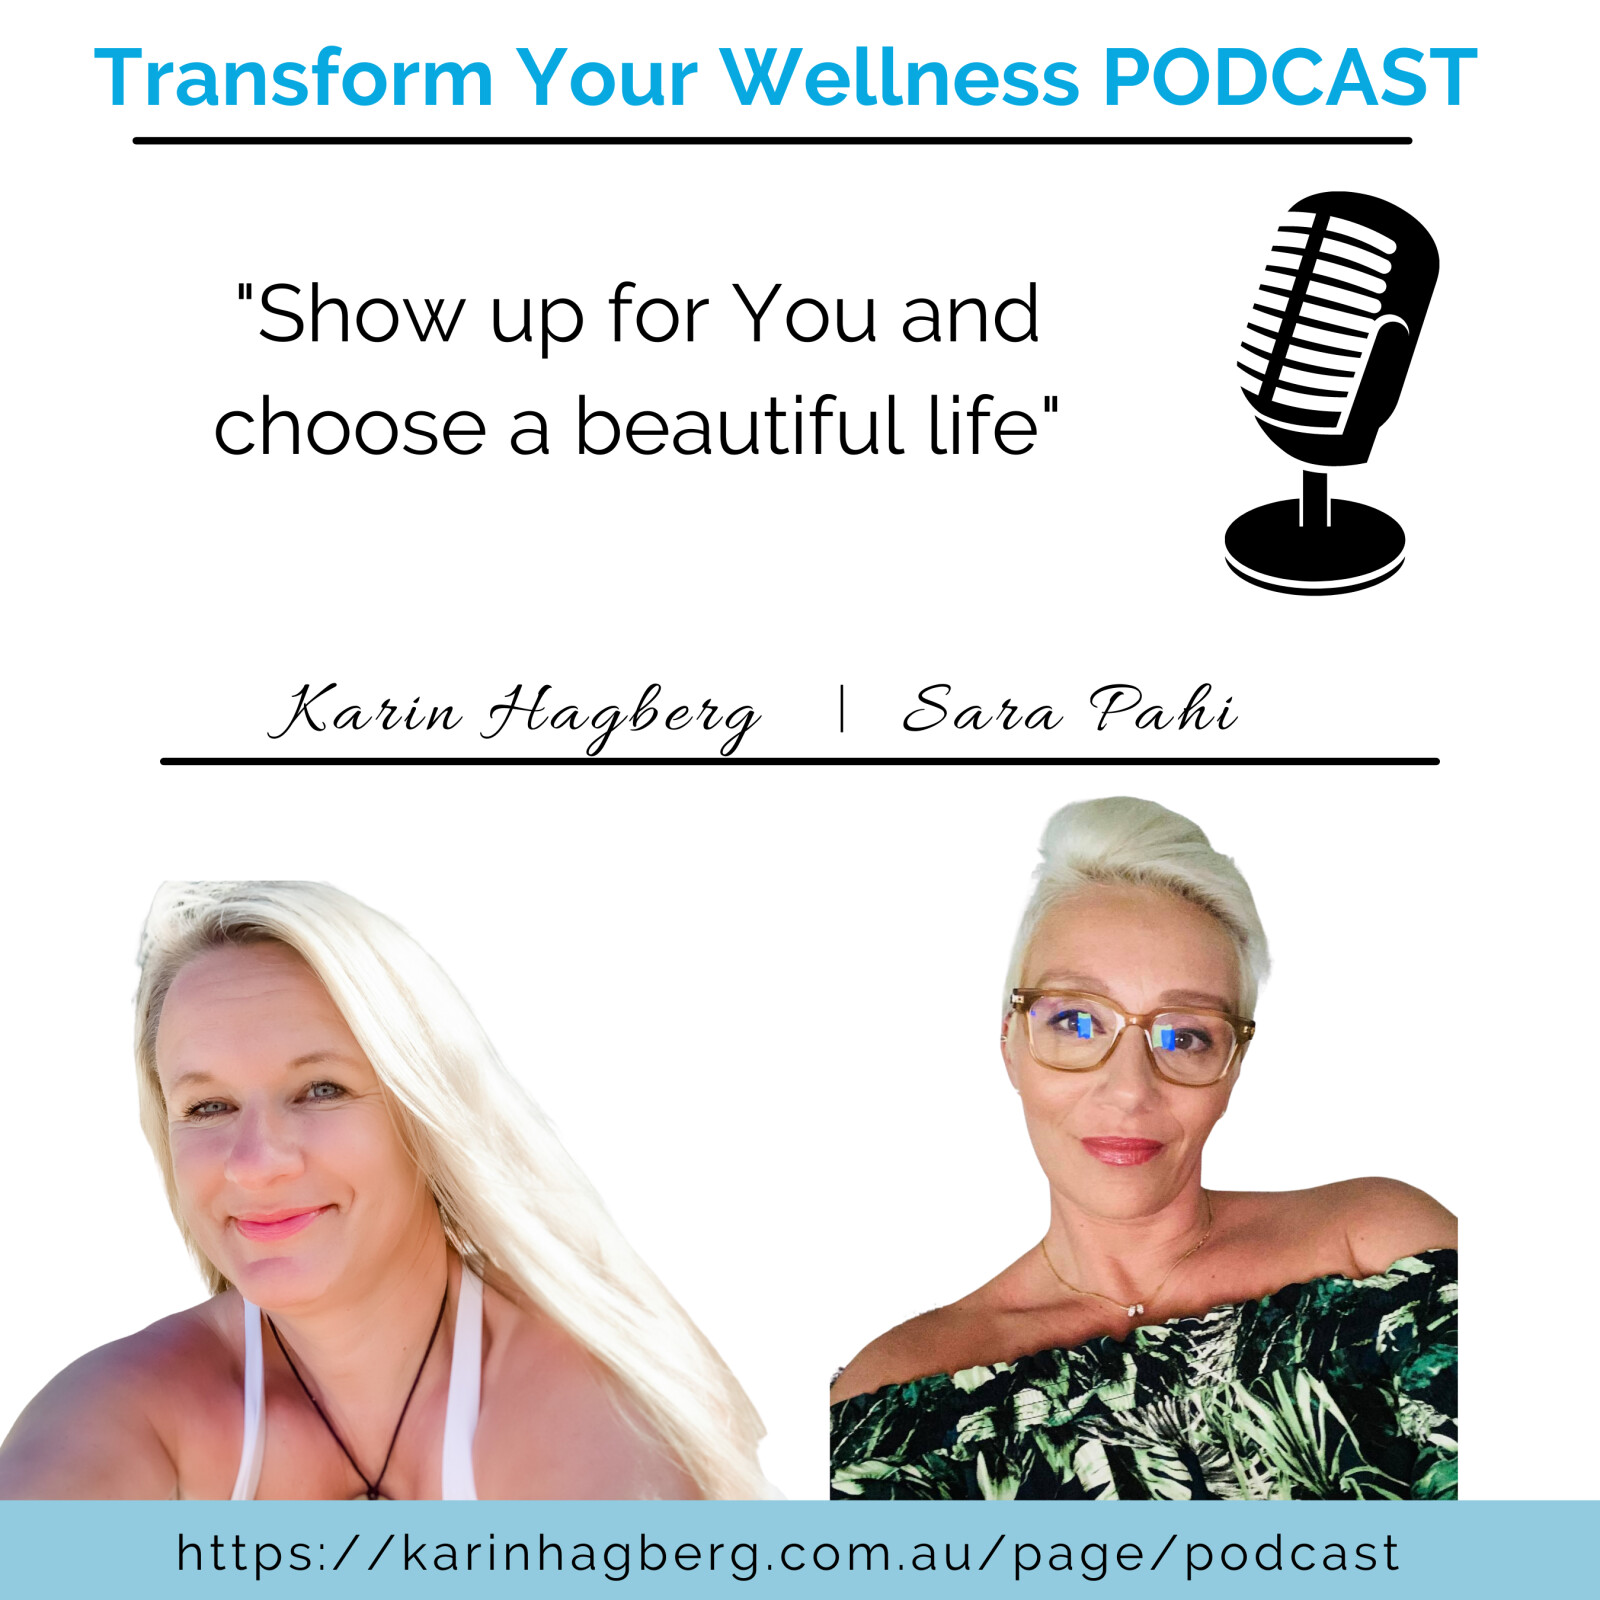 "Show up for You and choose a beautiful life" - Transform your Wellness Podcast episode 9